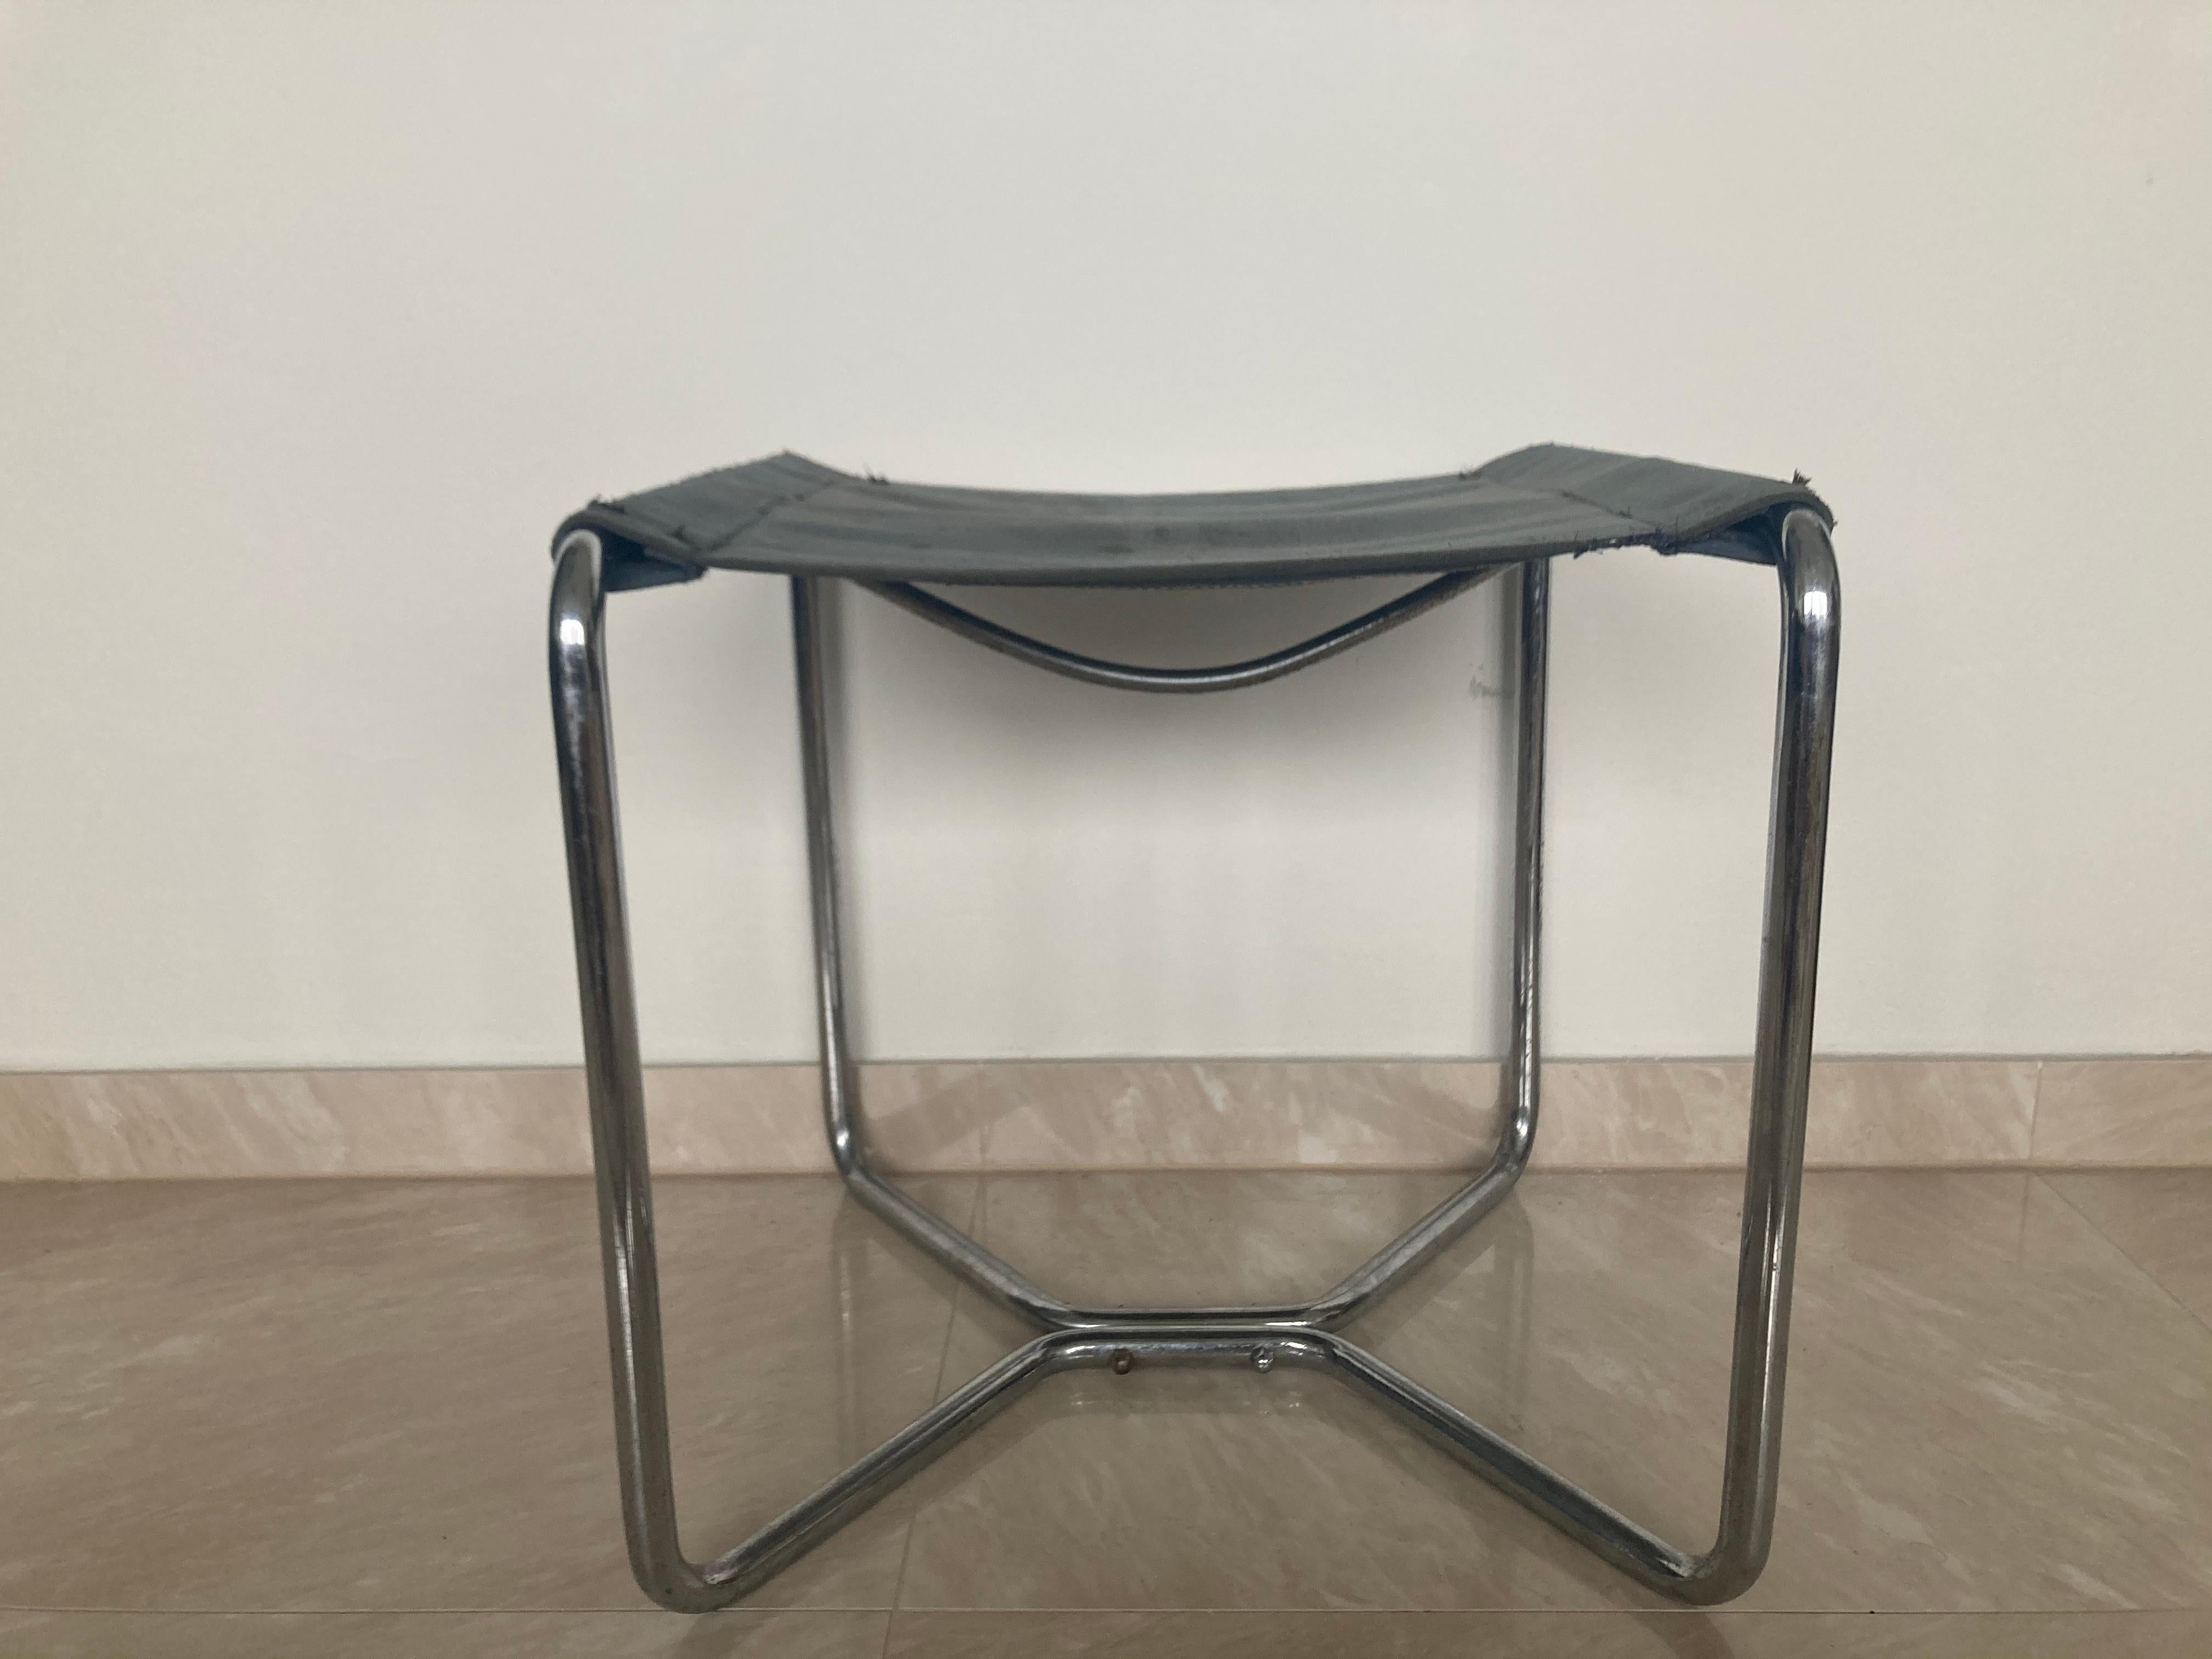 - 1930s, Thonet, B8
- Design: Marcel Breuer
- Published in books and catalogues
- Original condition, chrome with patina, all screws original
- Original blue Eisengarn / Iron fabric with minor damages.